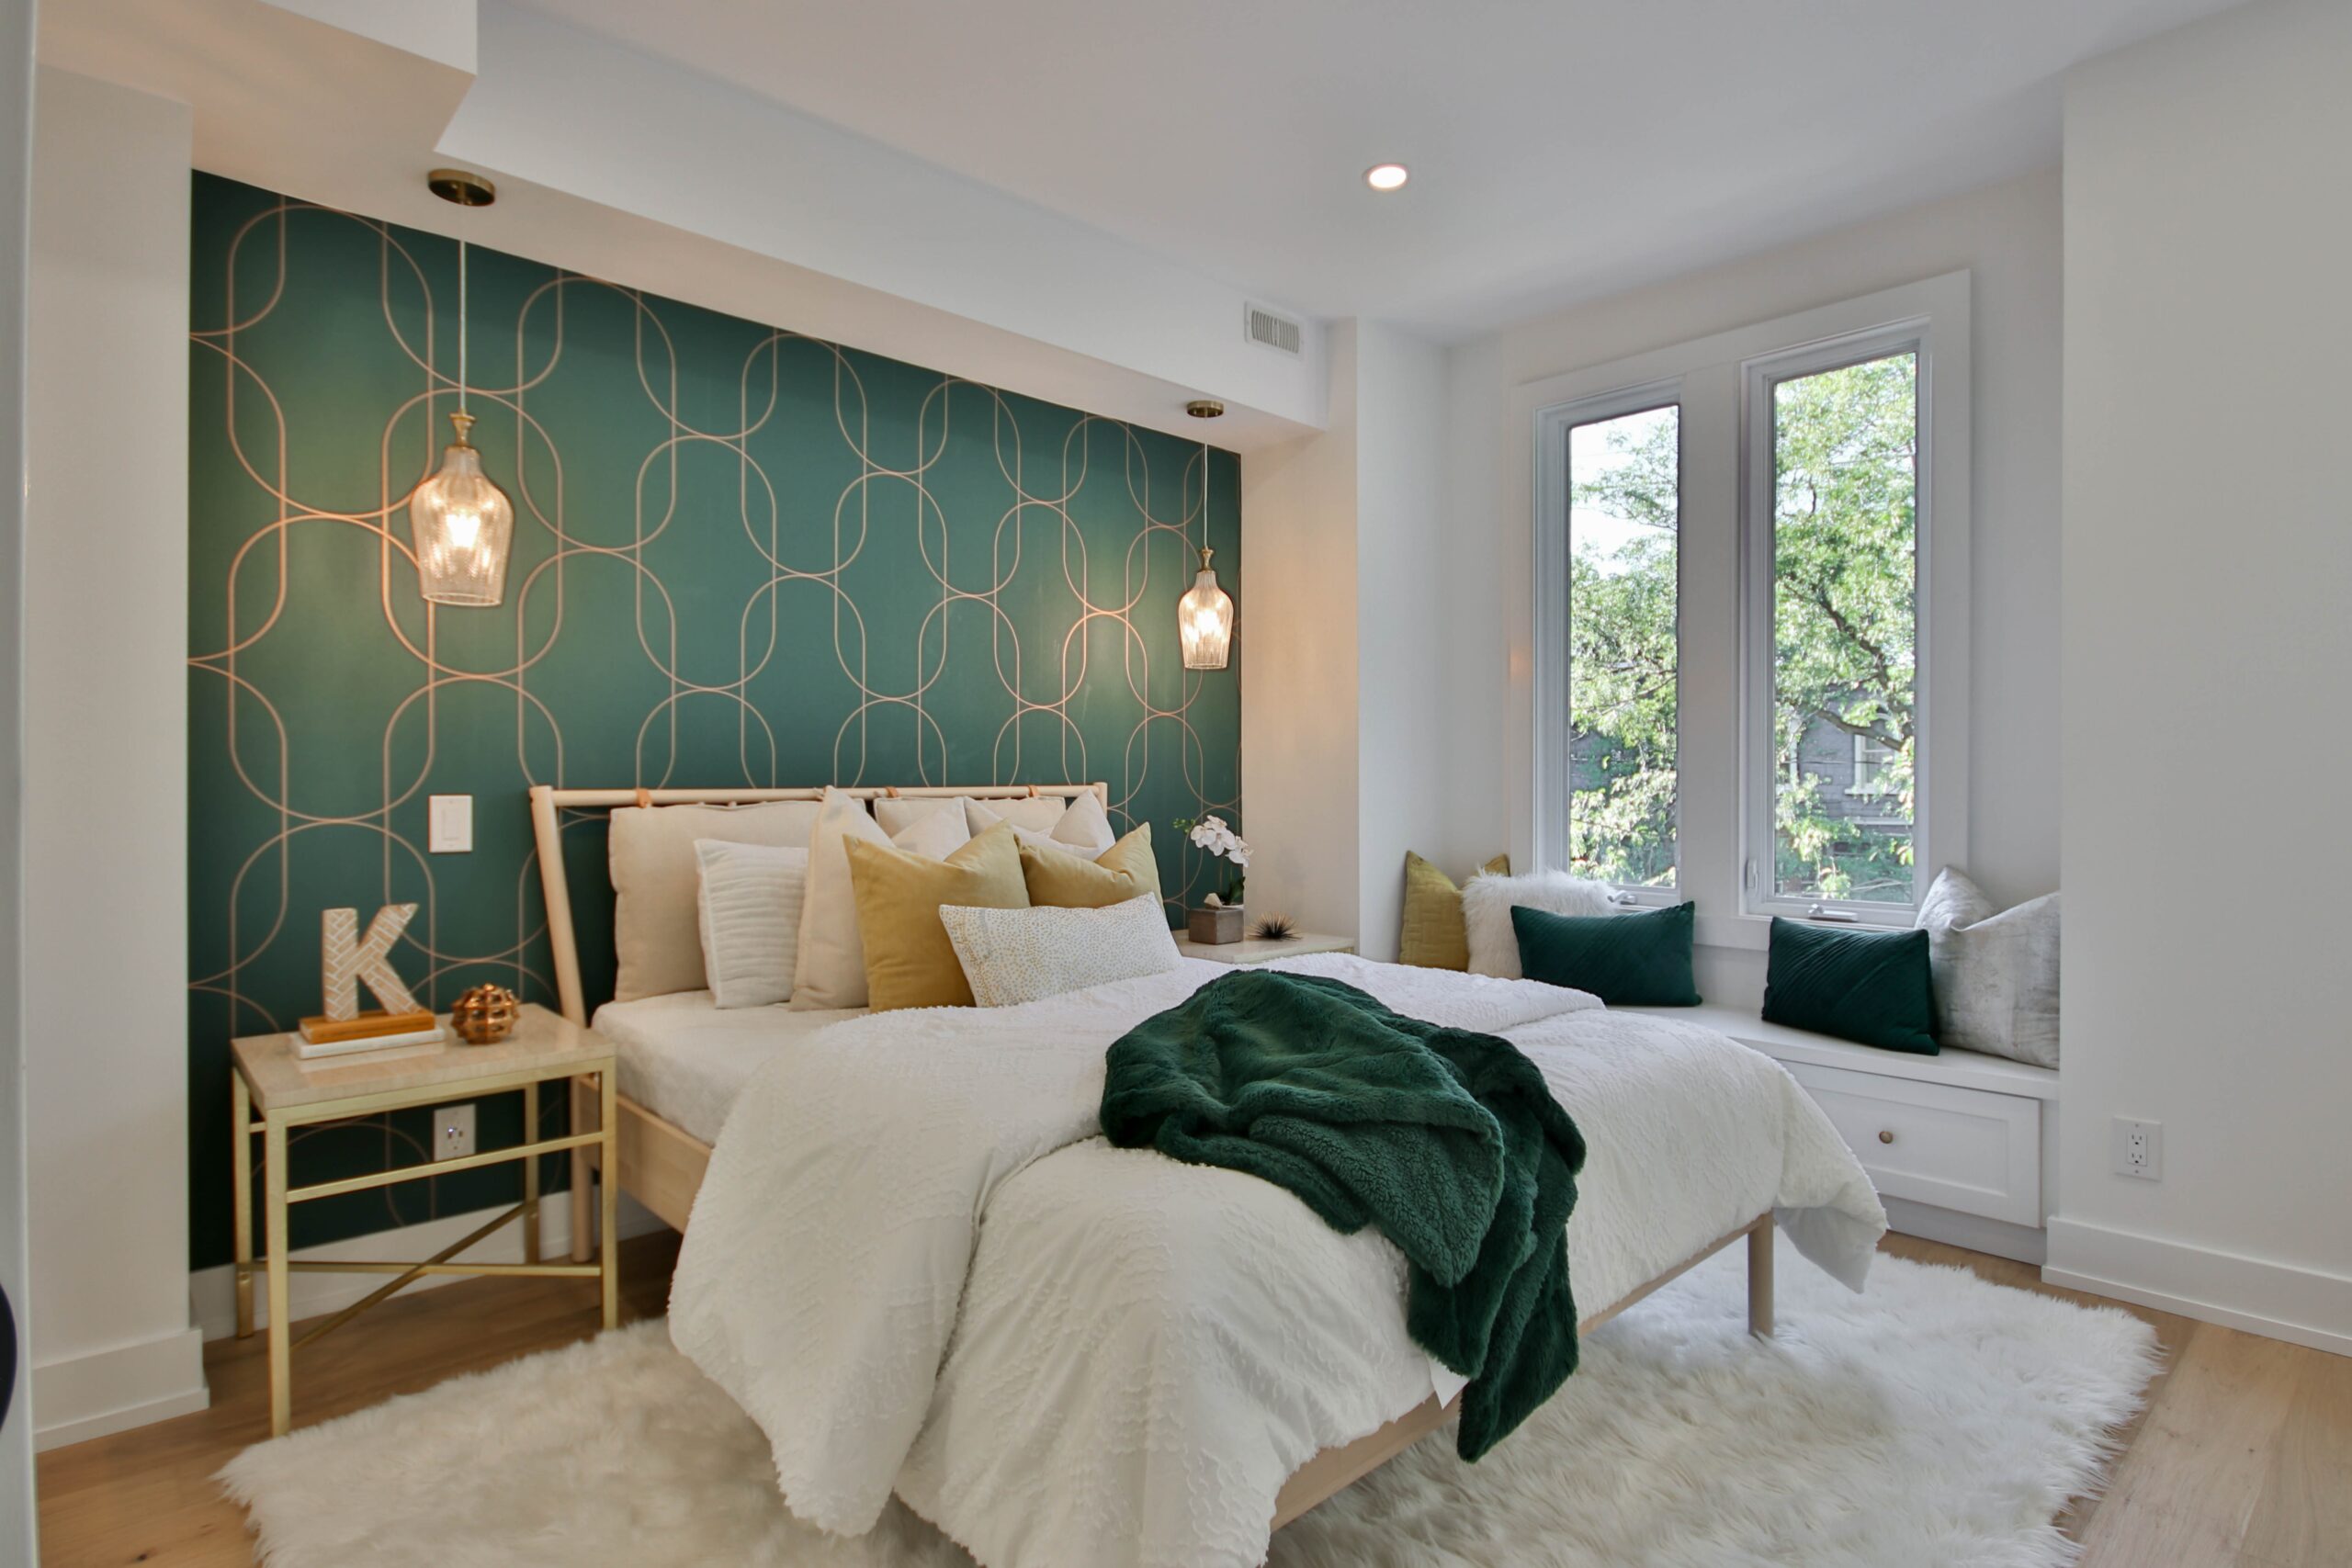 Sage green is one of the most calming colors to paint your bedroom. Pictured: A bedroom with a sage green wall and decor.